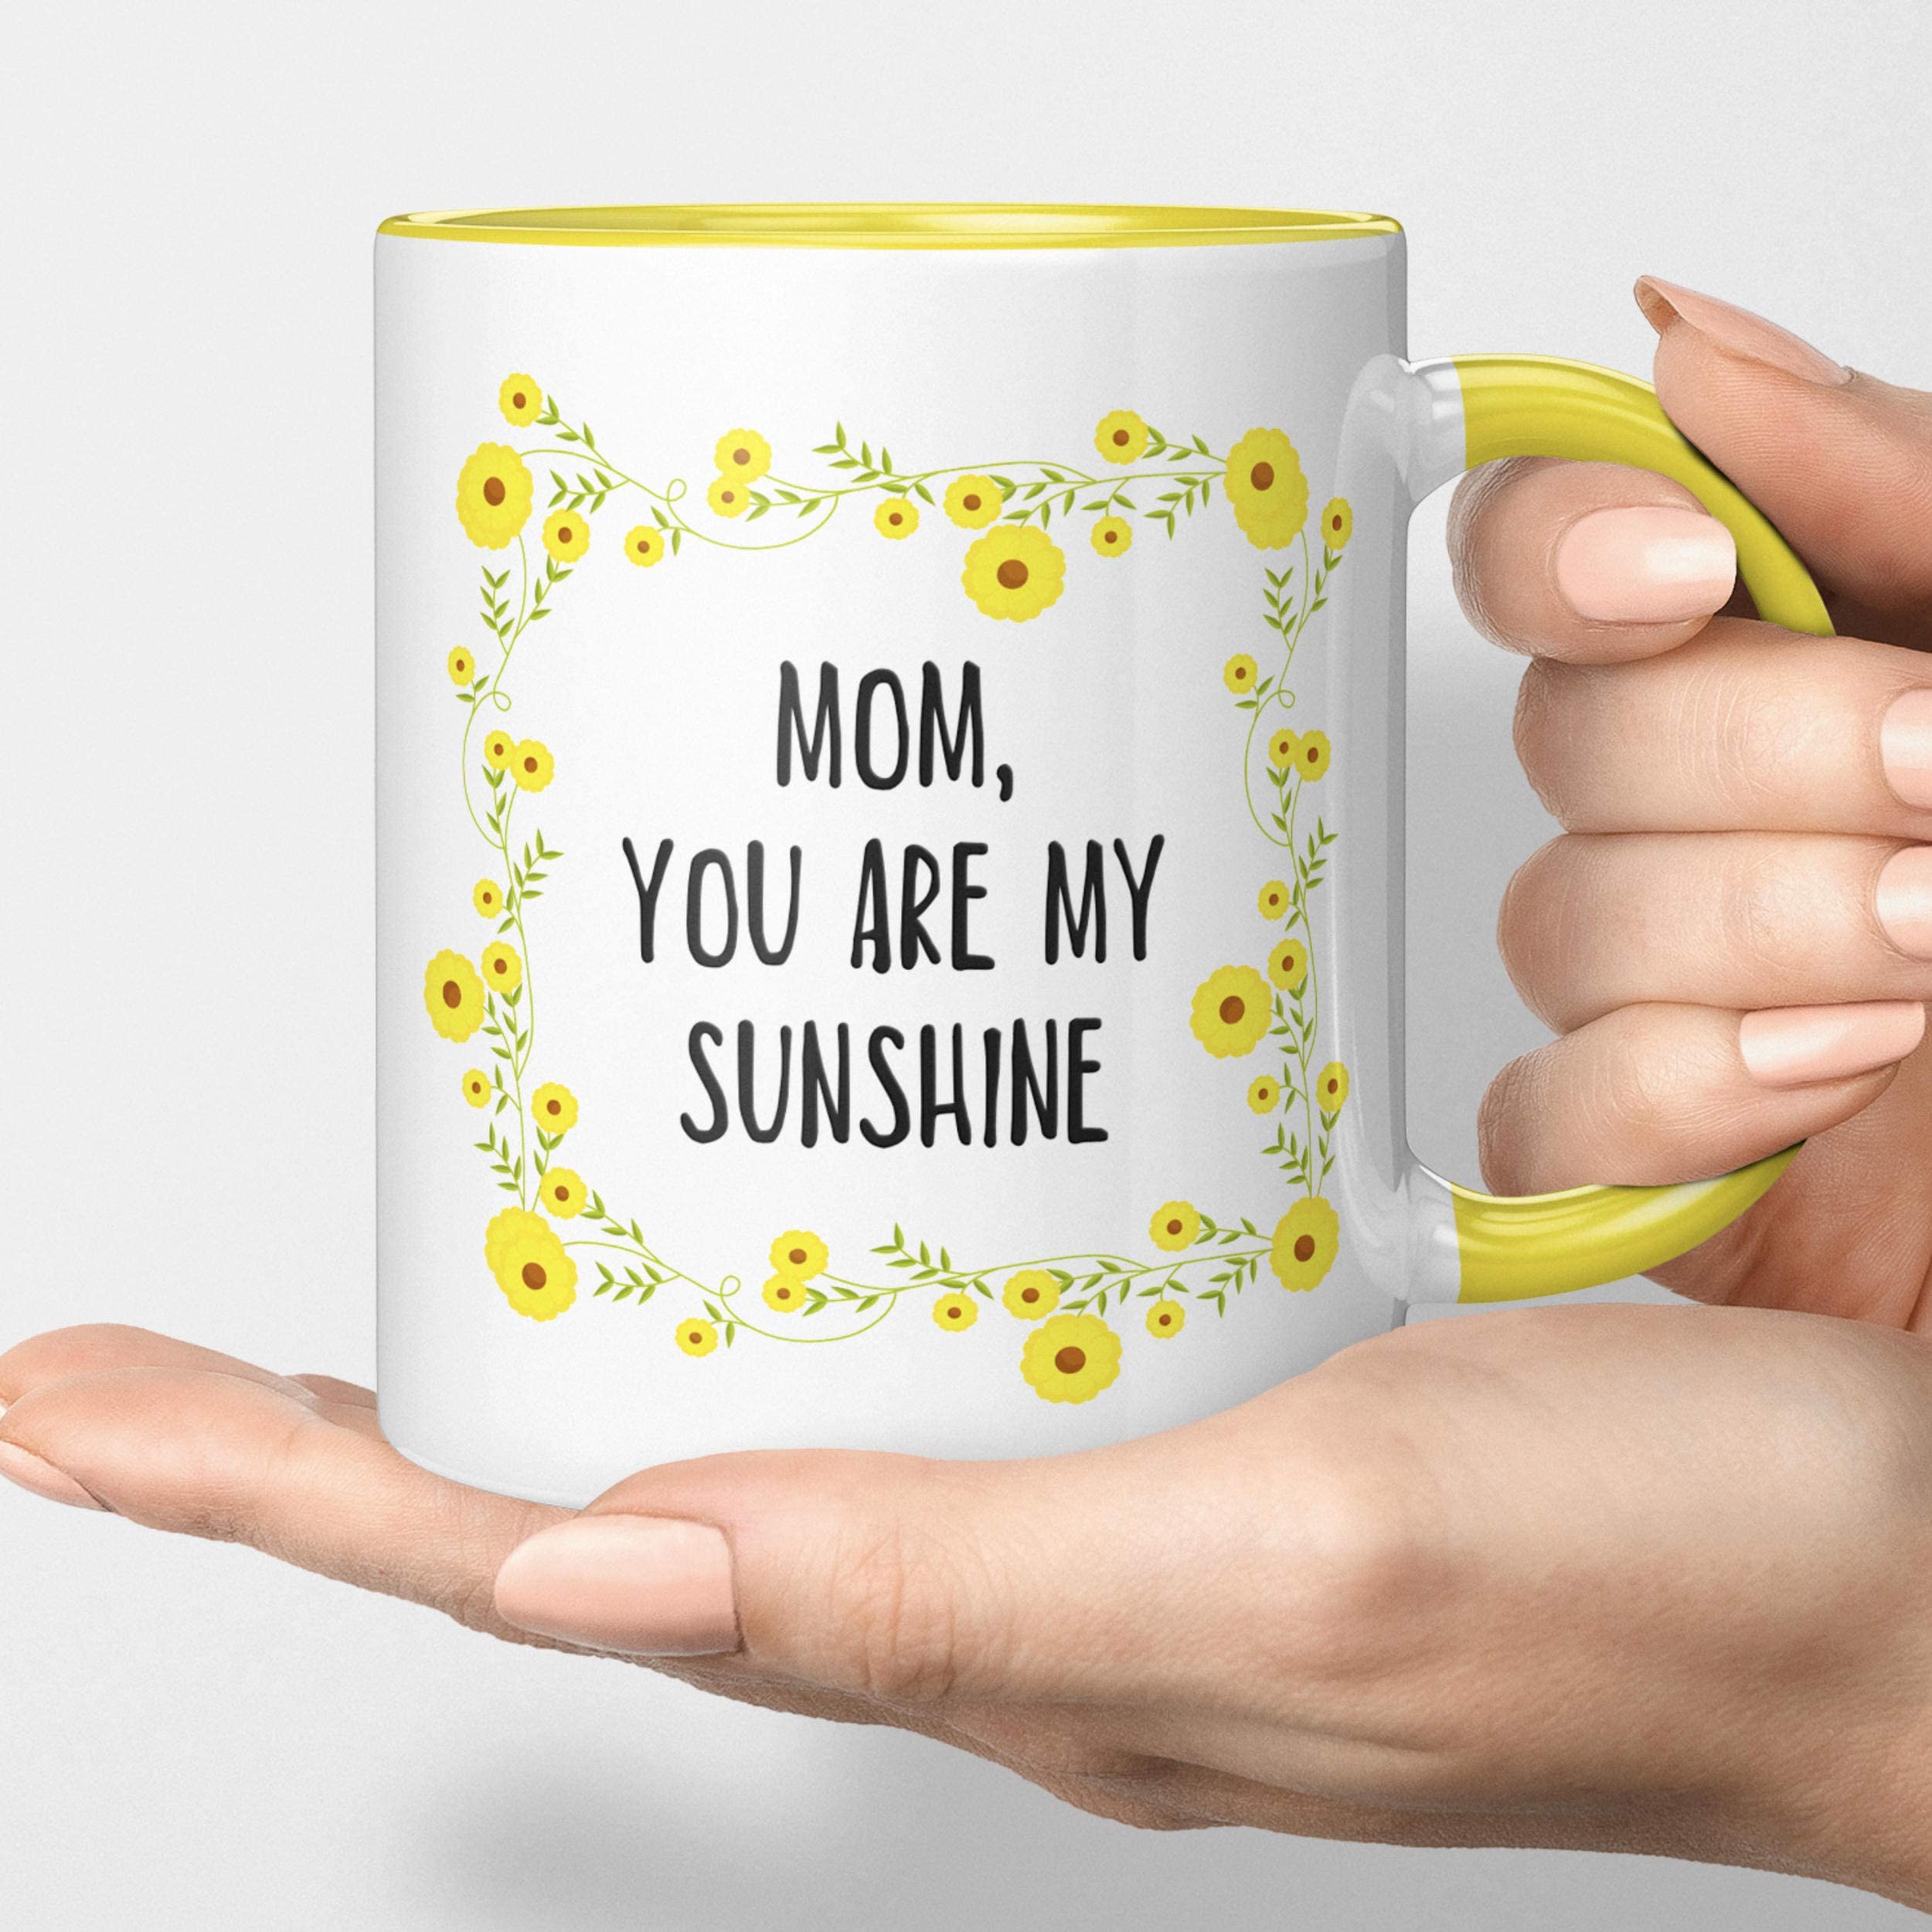 Mom You Are My Sunshine - Mother's Day Coffee Mug Tea Cup. From Son, Daughter. Sunny Yellow Floral Mug For Momma. I Love You Gift. For Birthday, Mother's Day. Gratitude For Best Mama.